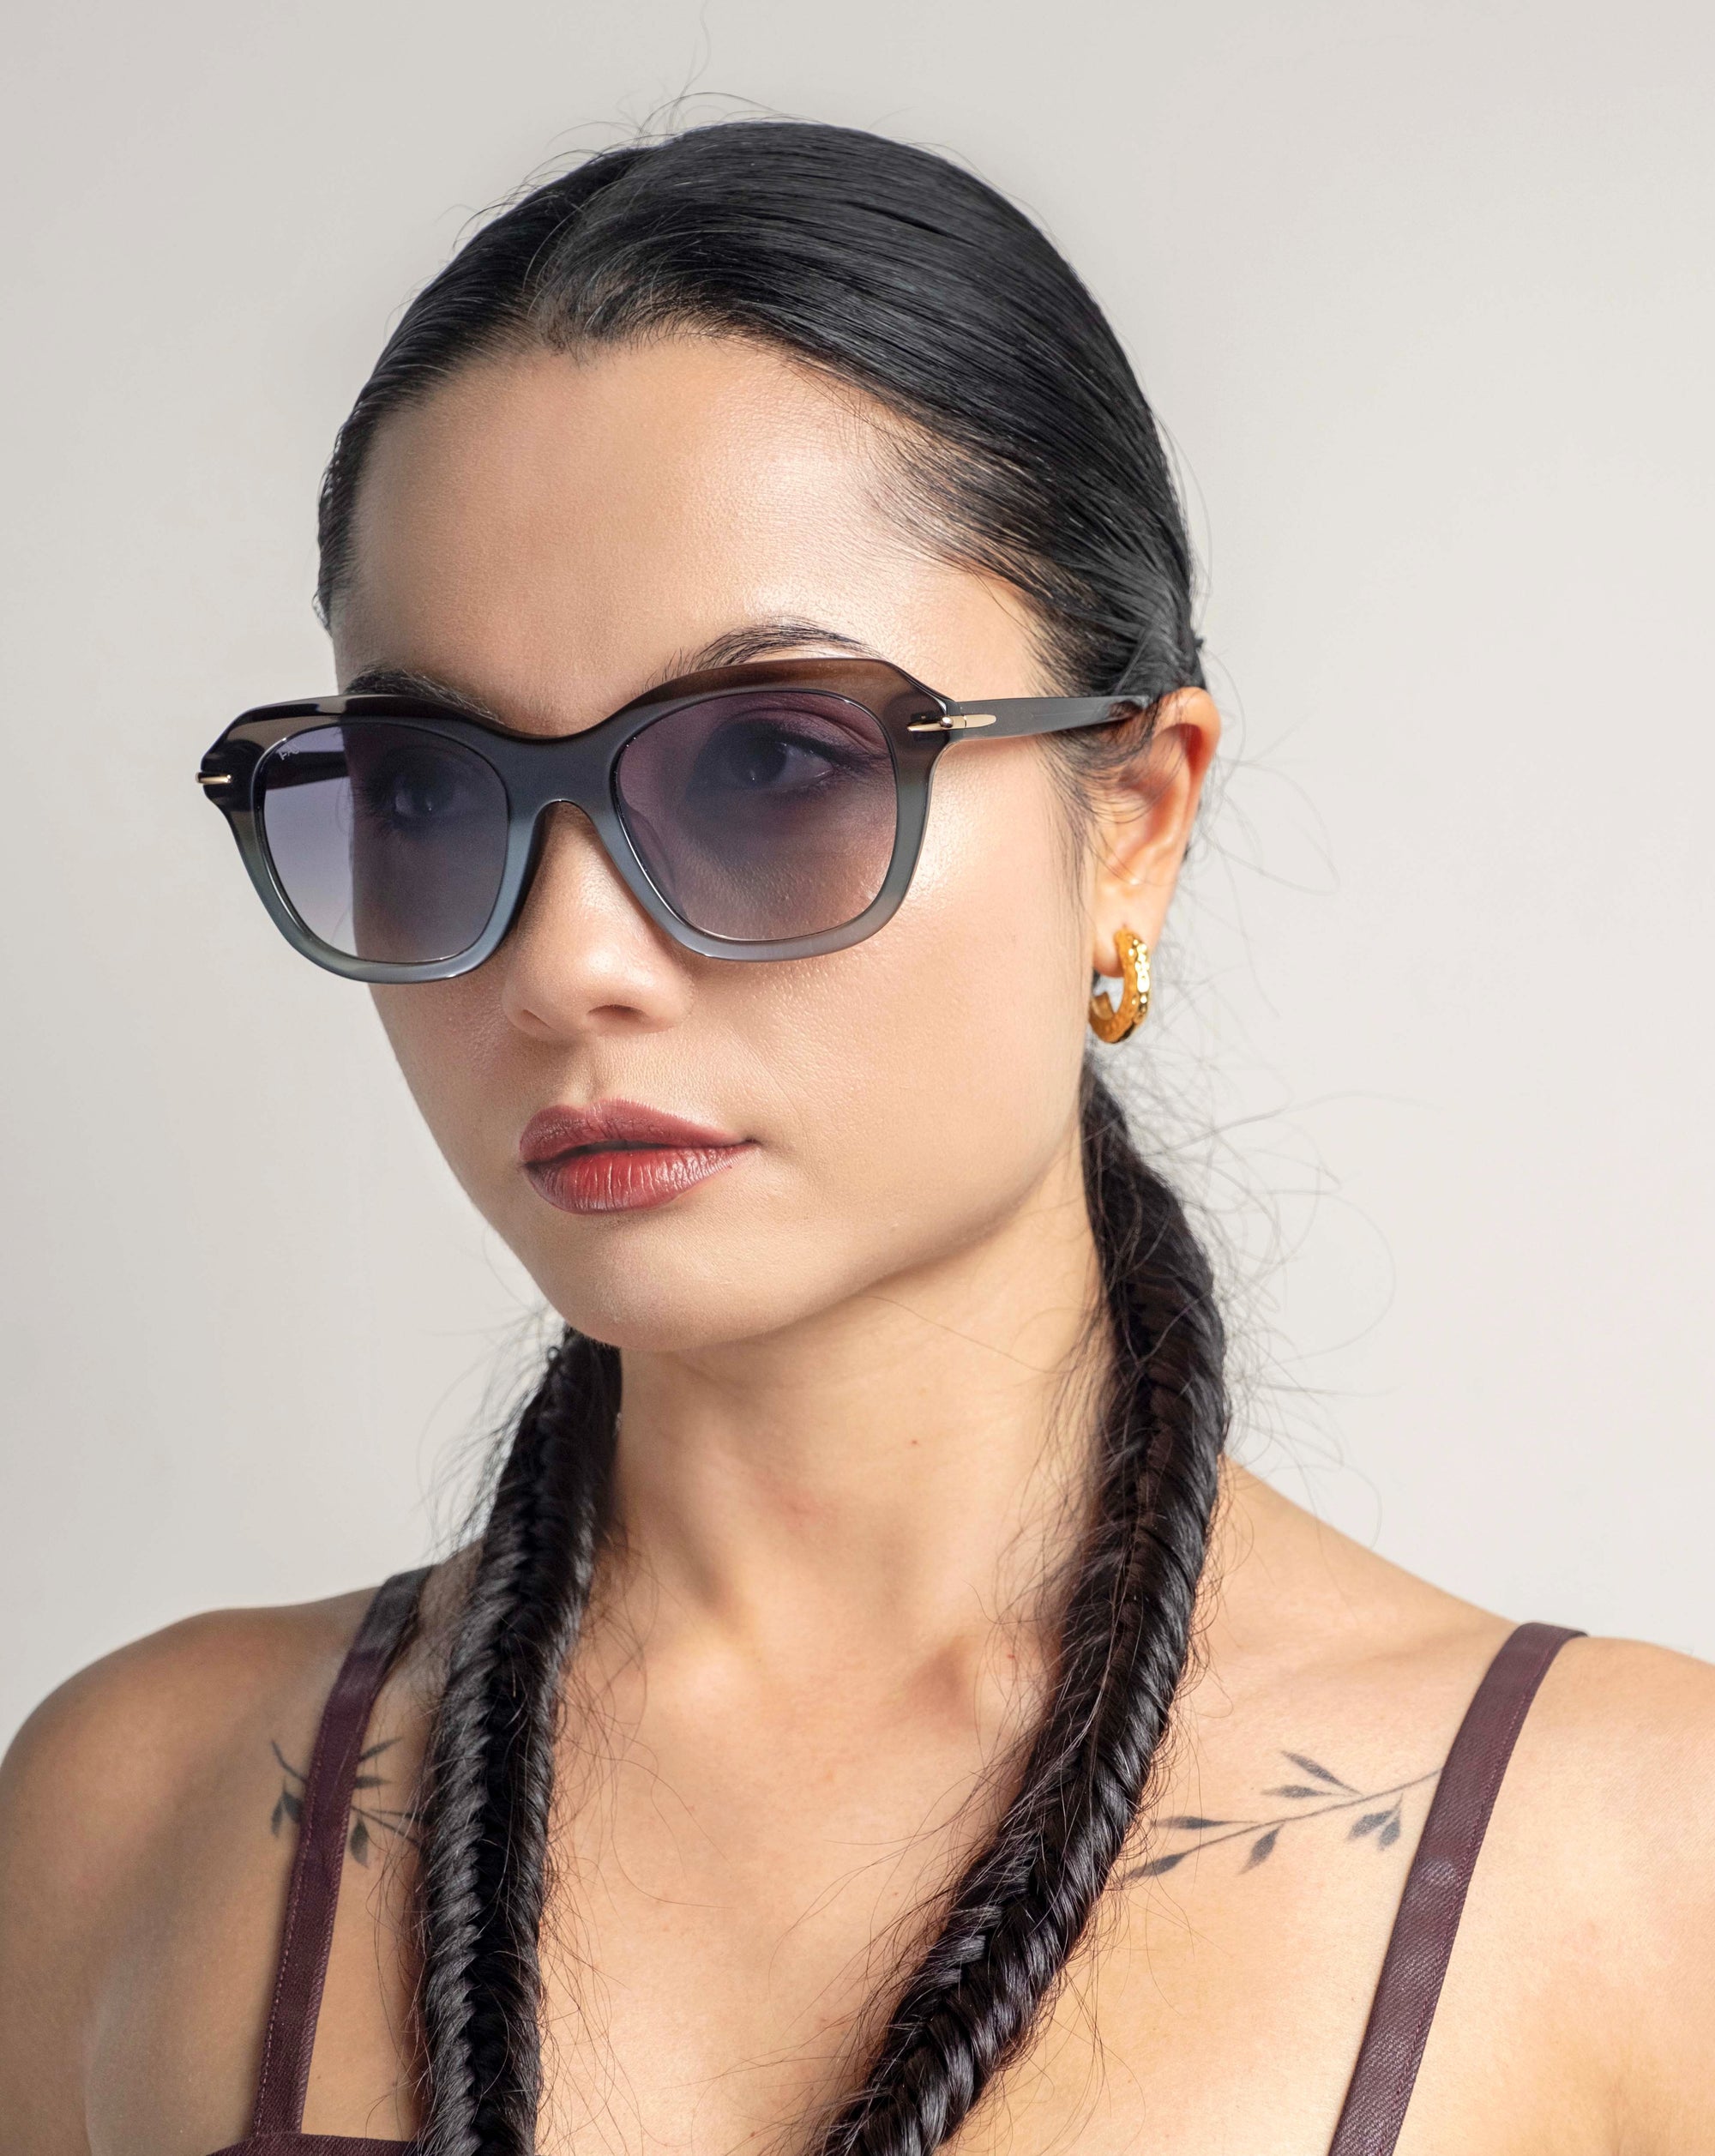 A woman with long dark hair styled in two side braids wears oversized cat-eye Helene sunglasses by For Art&#39;s Sake®. She has a neutral facial expression, minimal makeup, and small hoop earrings. Her shoulder tattoos are partially visible. The background is plain and light-colored.